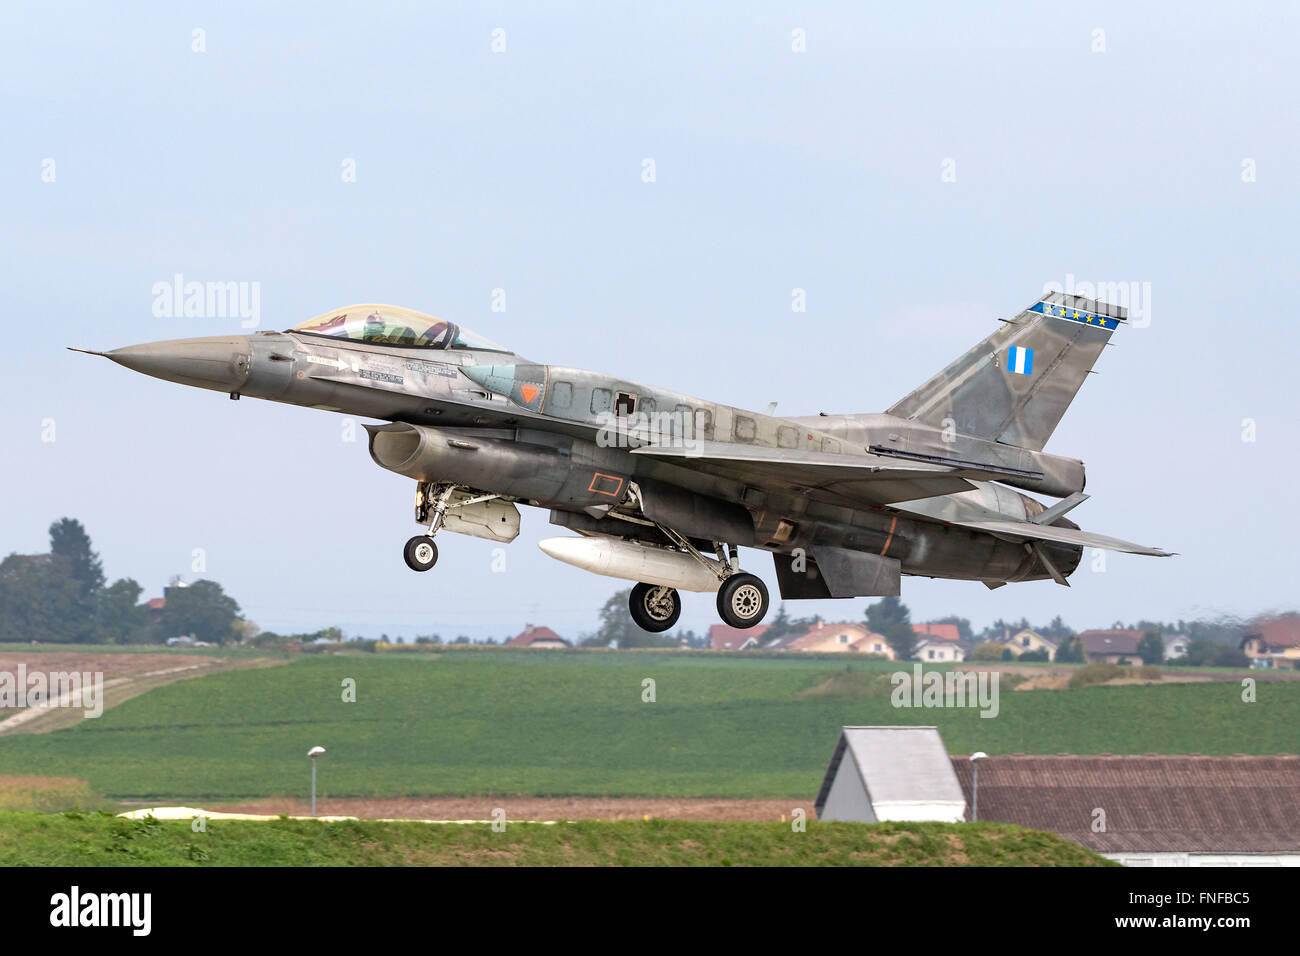 Air Force (grec Hellenic Air Force, HAF) Lockheed Martin F-16 Fighting Falcon fighter aircraft Banque D'Images